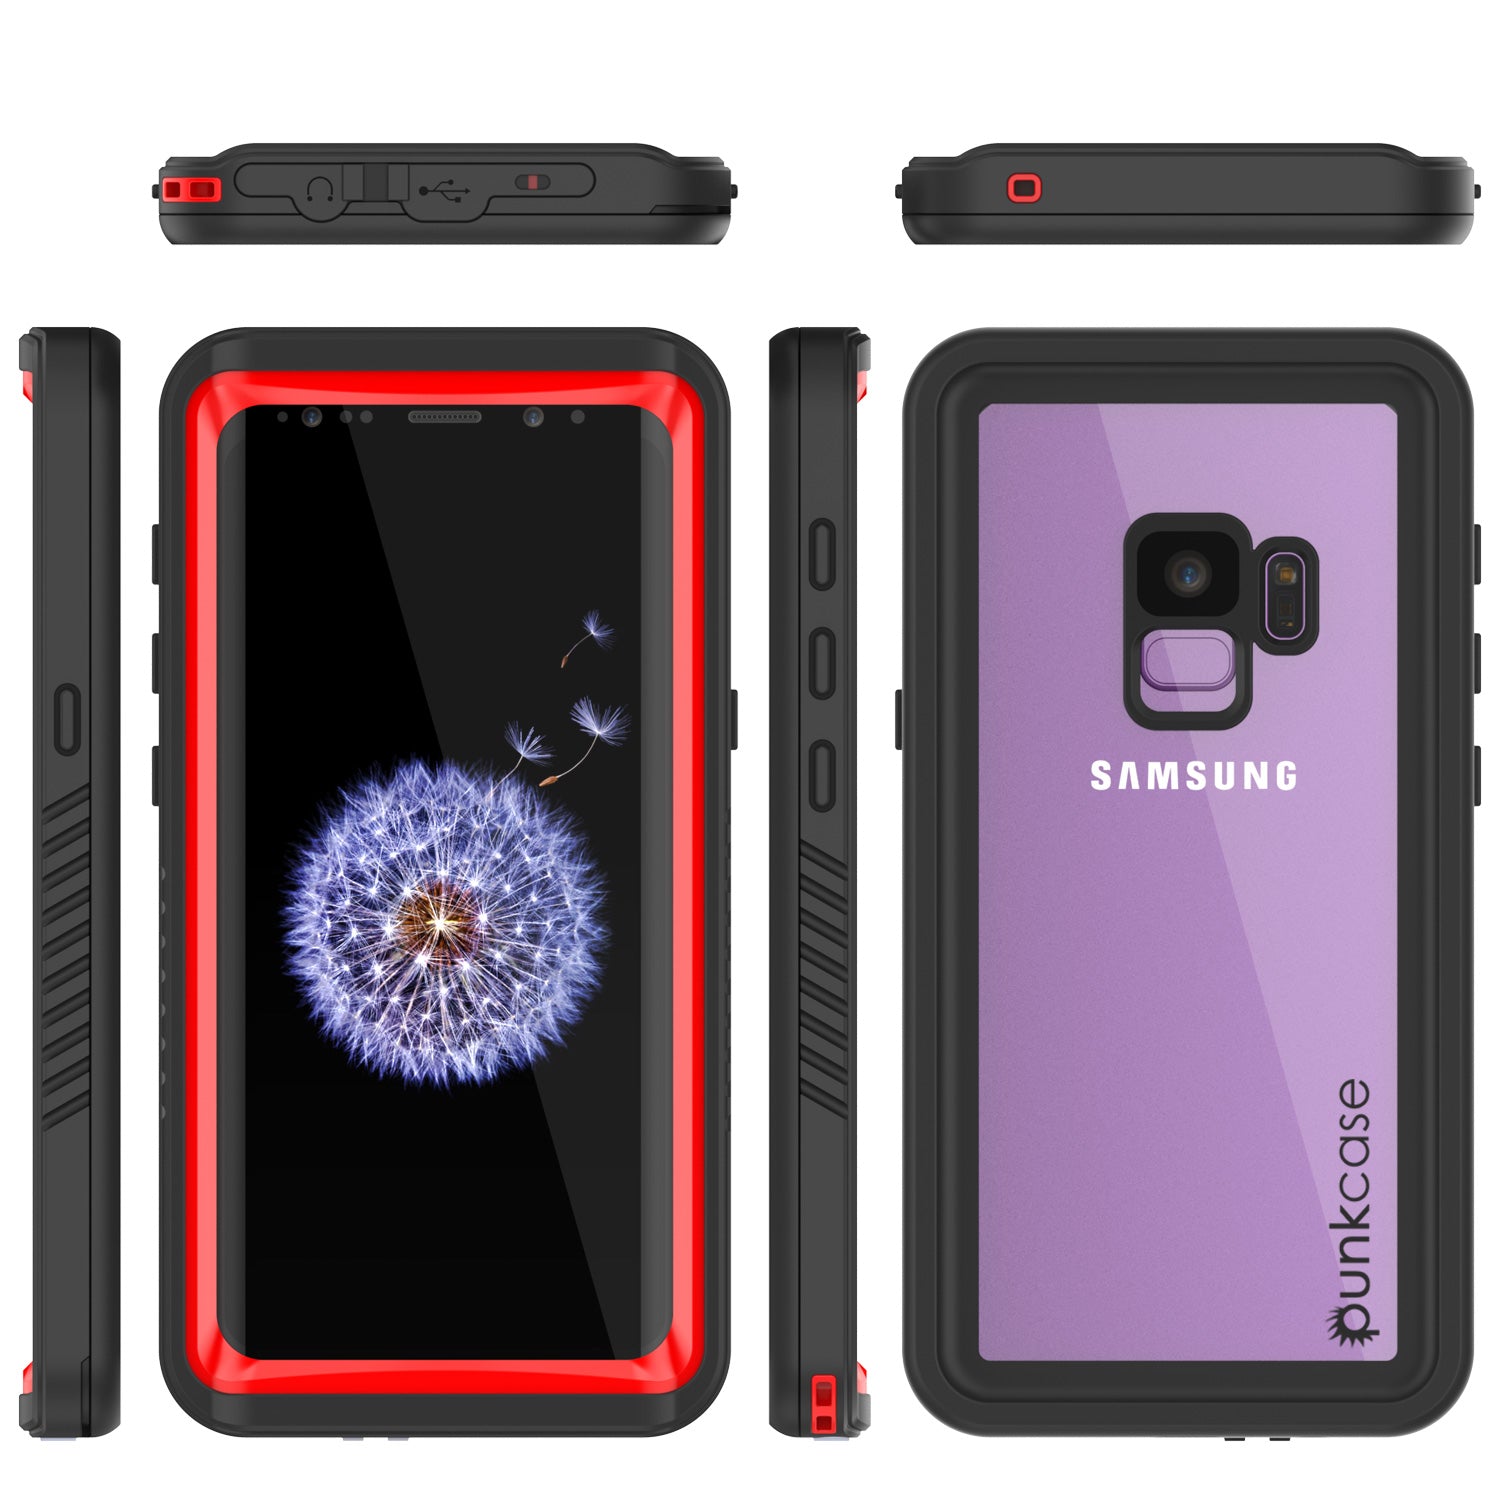 Galaxy S9 Punkcase Extreme Series Armor Cover W/ Built In Screen [Red]